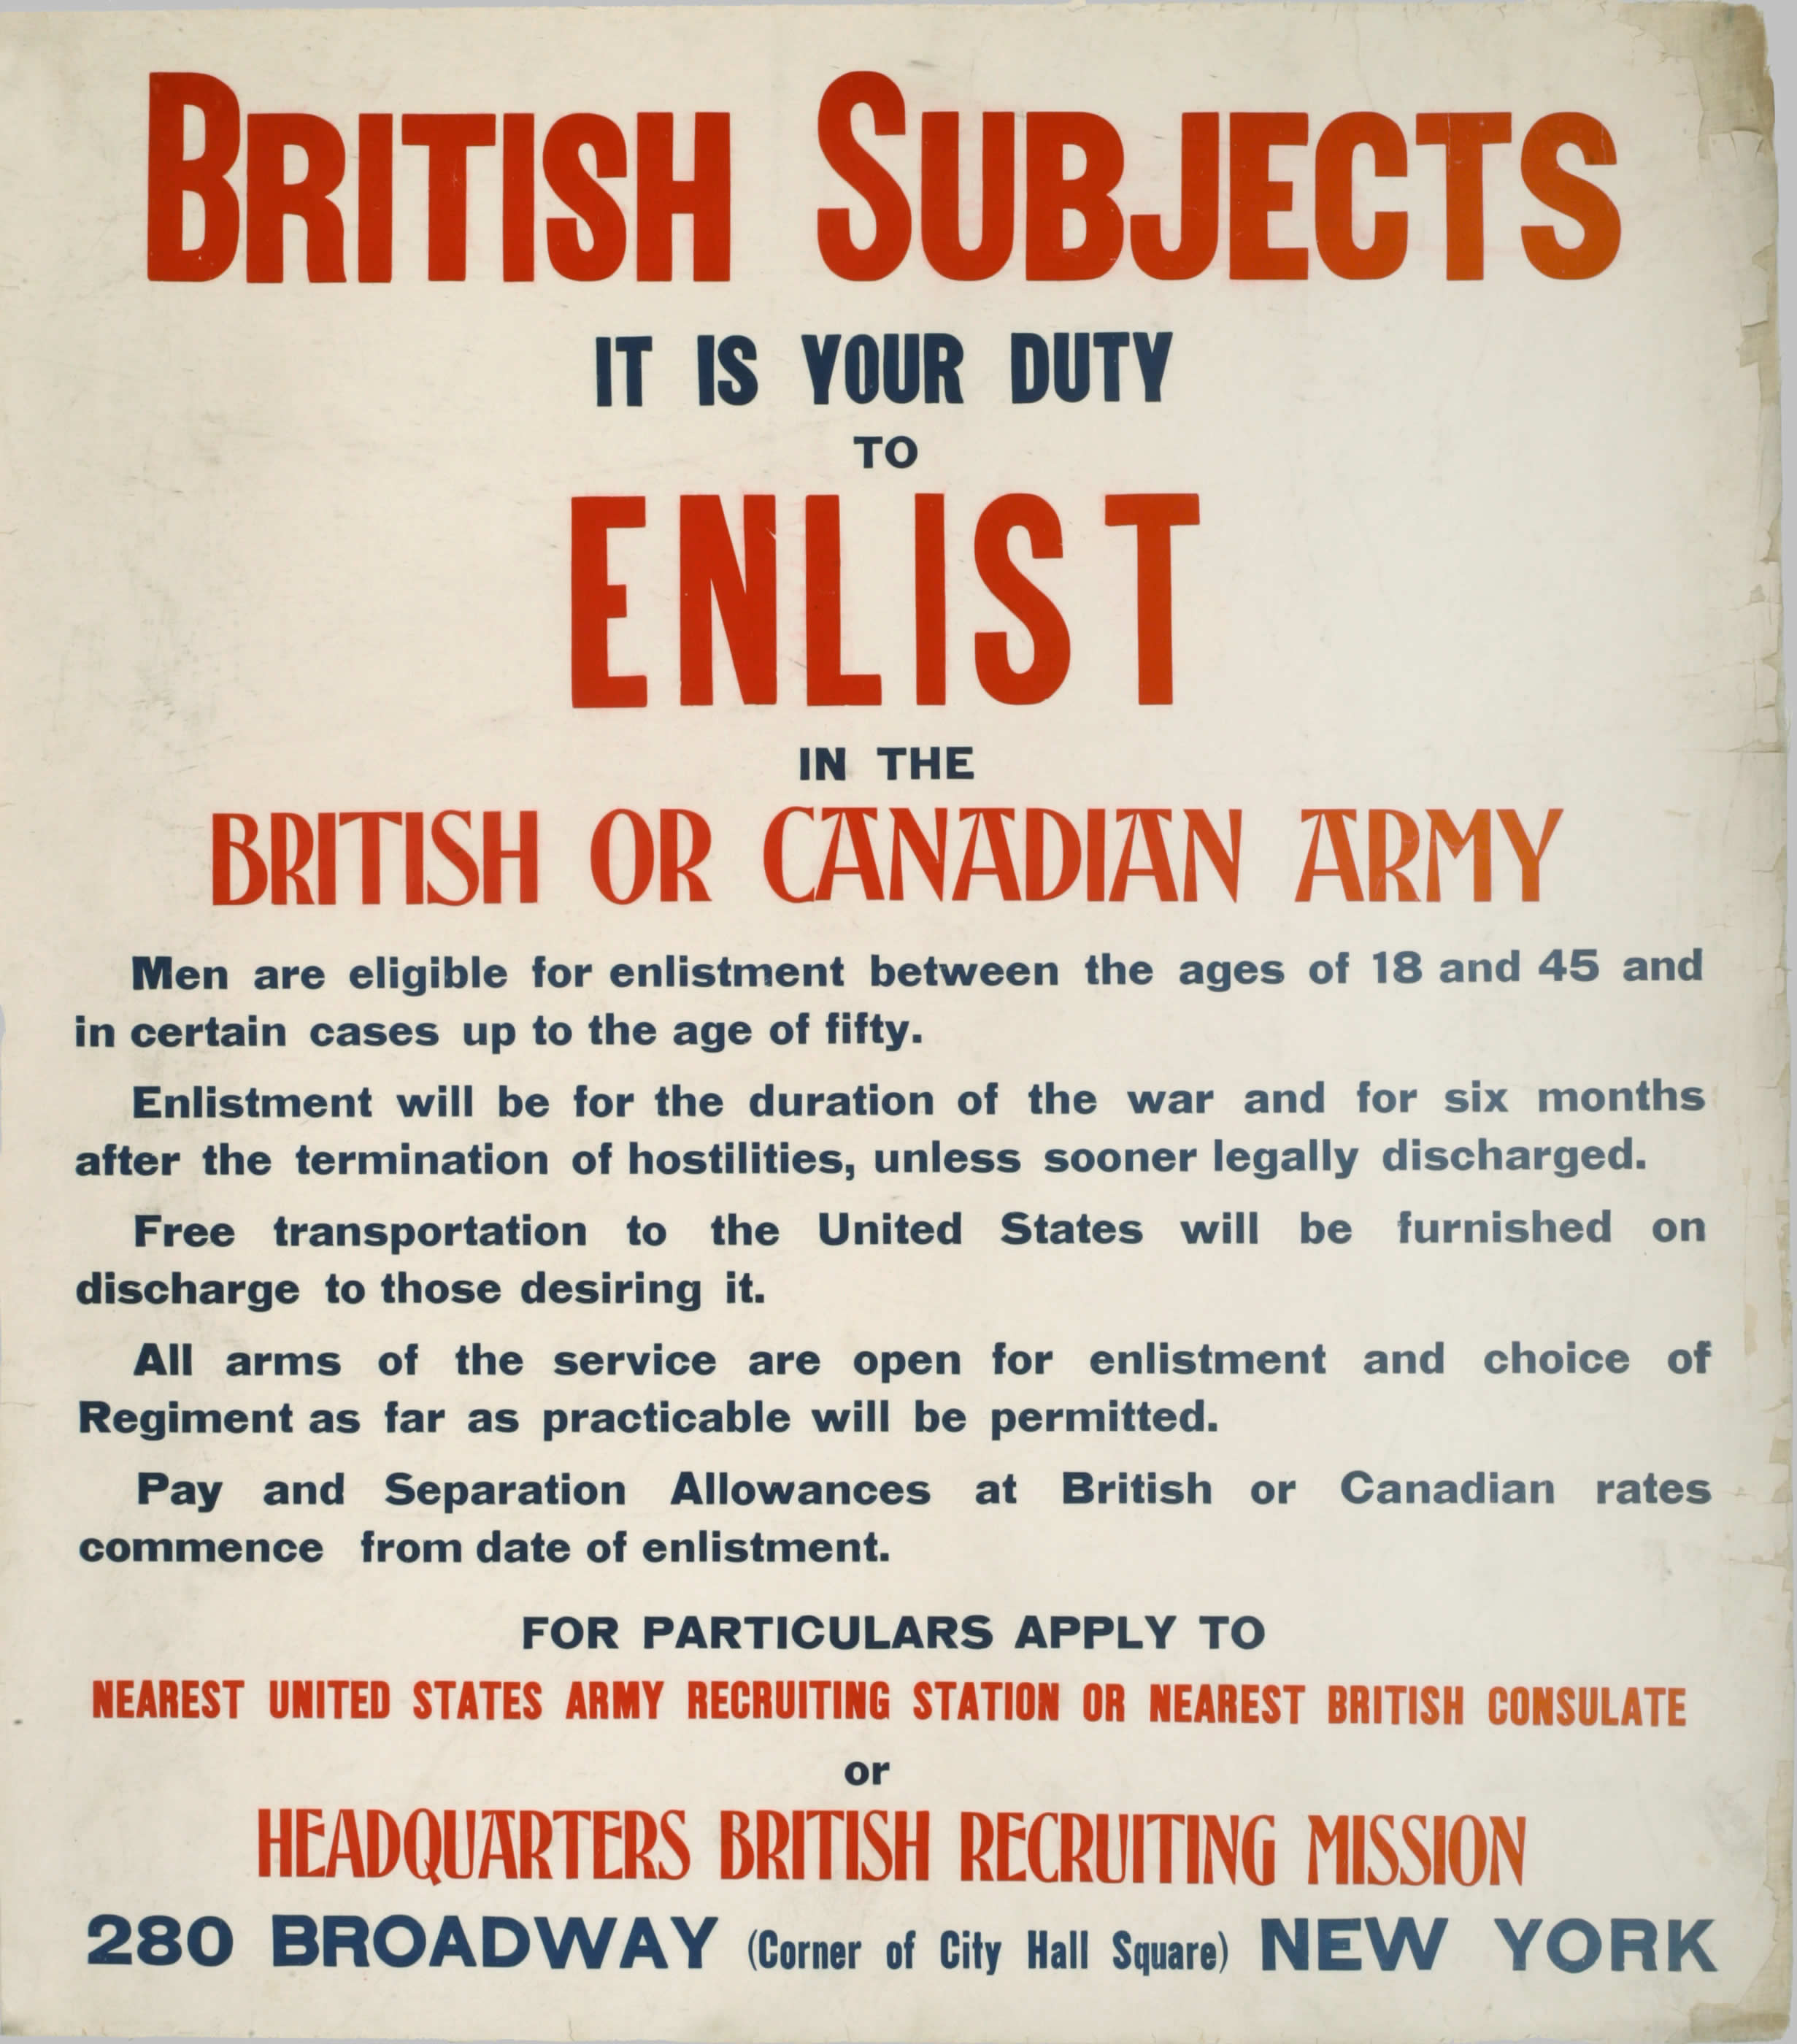 Enlist in the British or Canadian Army